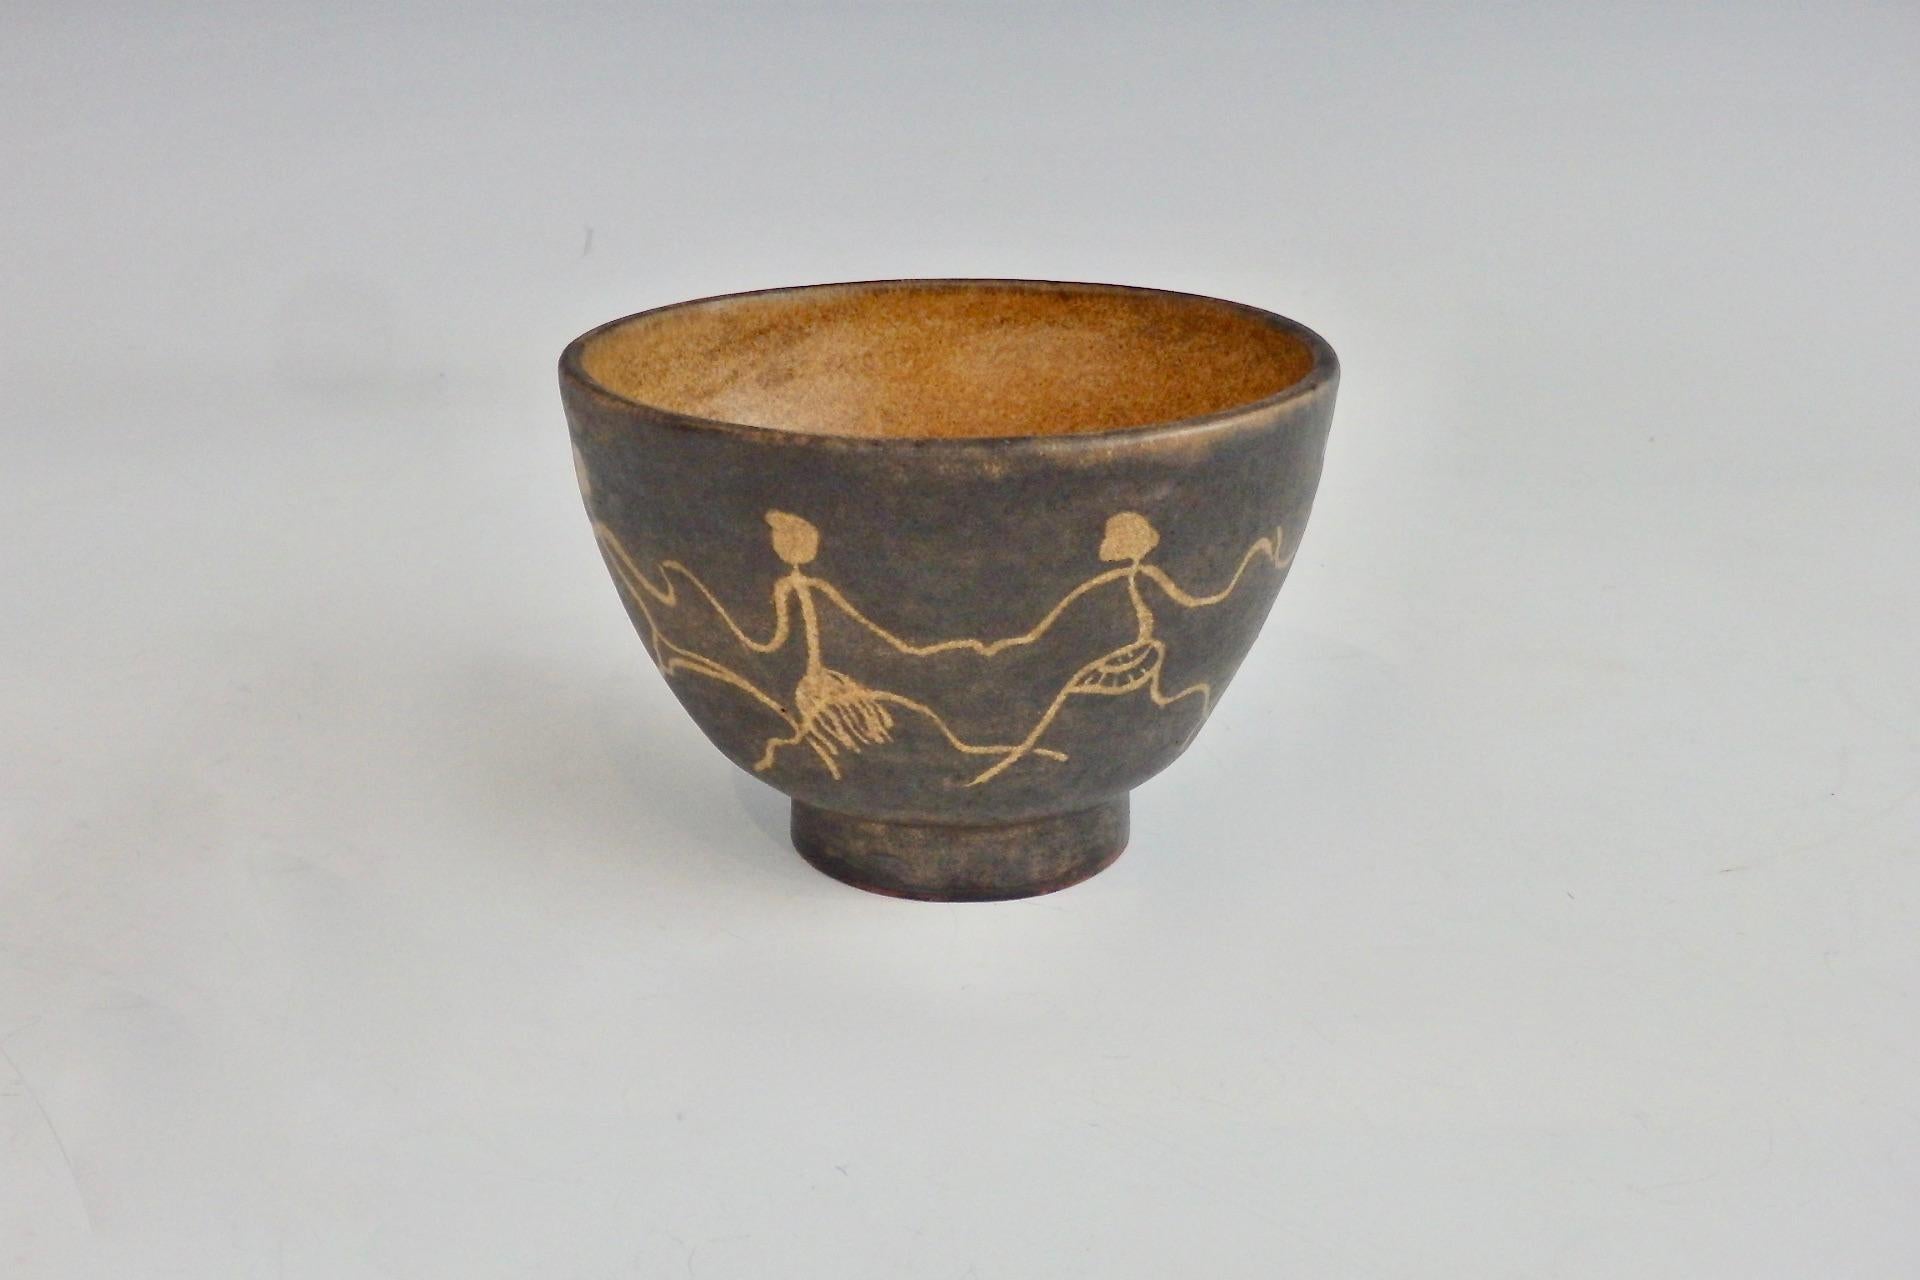 Pottery bowl by Rozsika Blackstone New York and Arizona, circa 1920-1962.
Caramel colored interior, brown exterior, sgraffito decorated with female stick figures holding hands and dancing in a ring, red ware body, incised signature R.B.